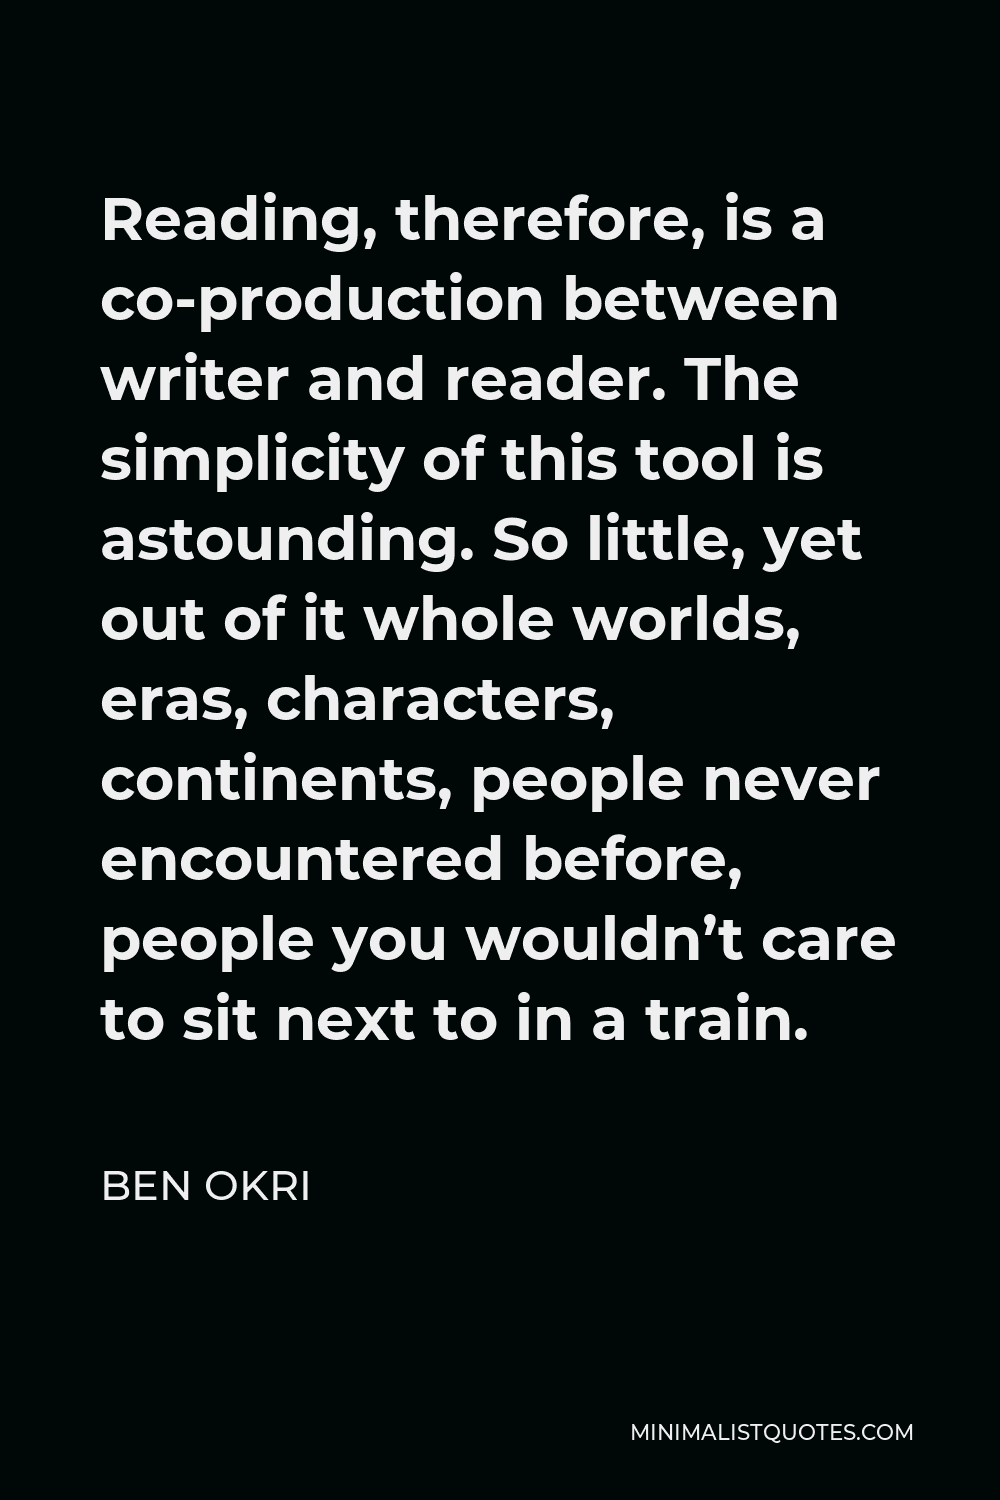 Ben Okri Quote - Reading, therefore, is a co-production between writer and reader. The simplicity of this tool is astounding. So little, yet out of it whole worlds, eras, characters, continents, people never encountered before, people you wouldn’t care to sit next to in a train.